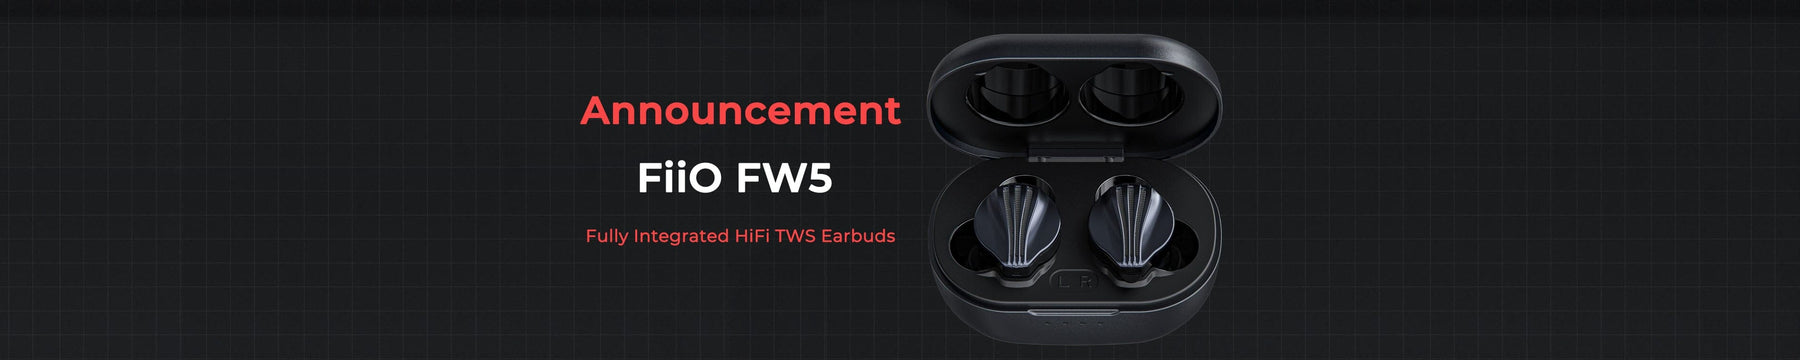 FiiO Introduces FW5: Fully Integrated TWS Earphones With Bluetooth V5.2 High-Res Support